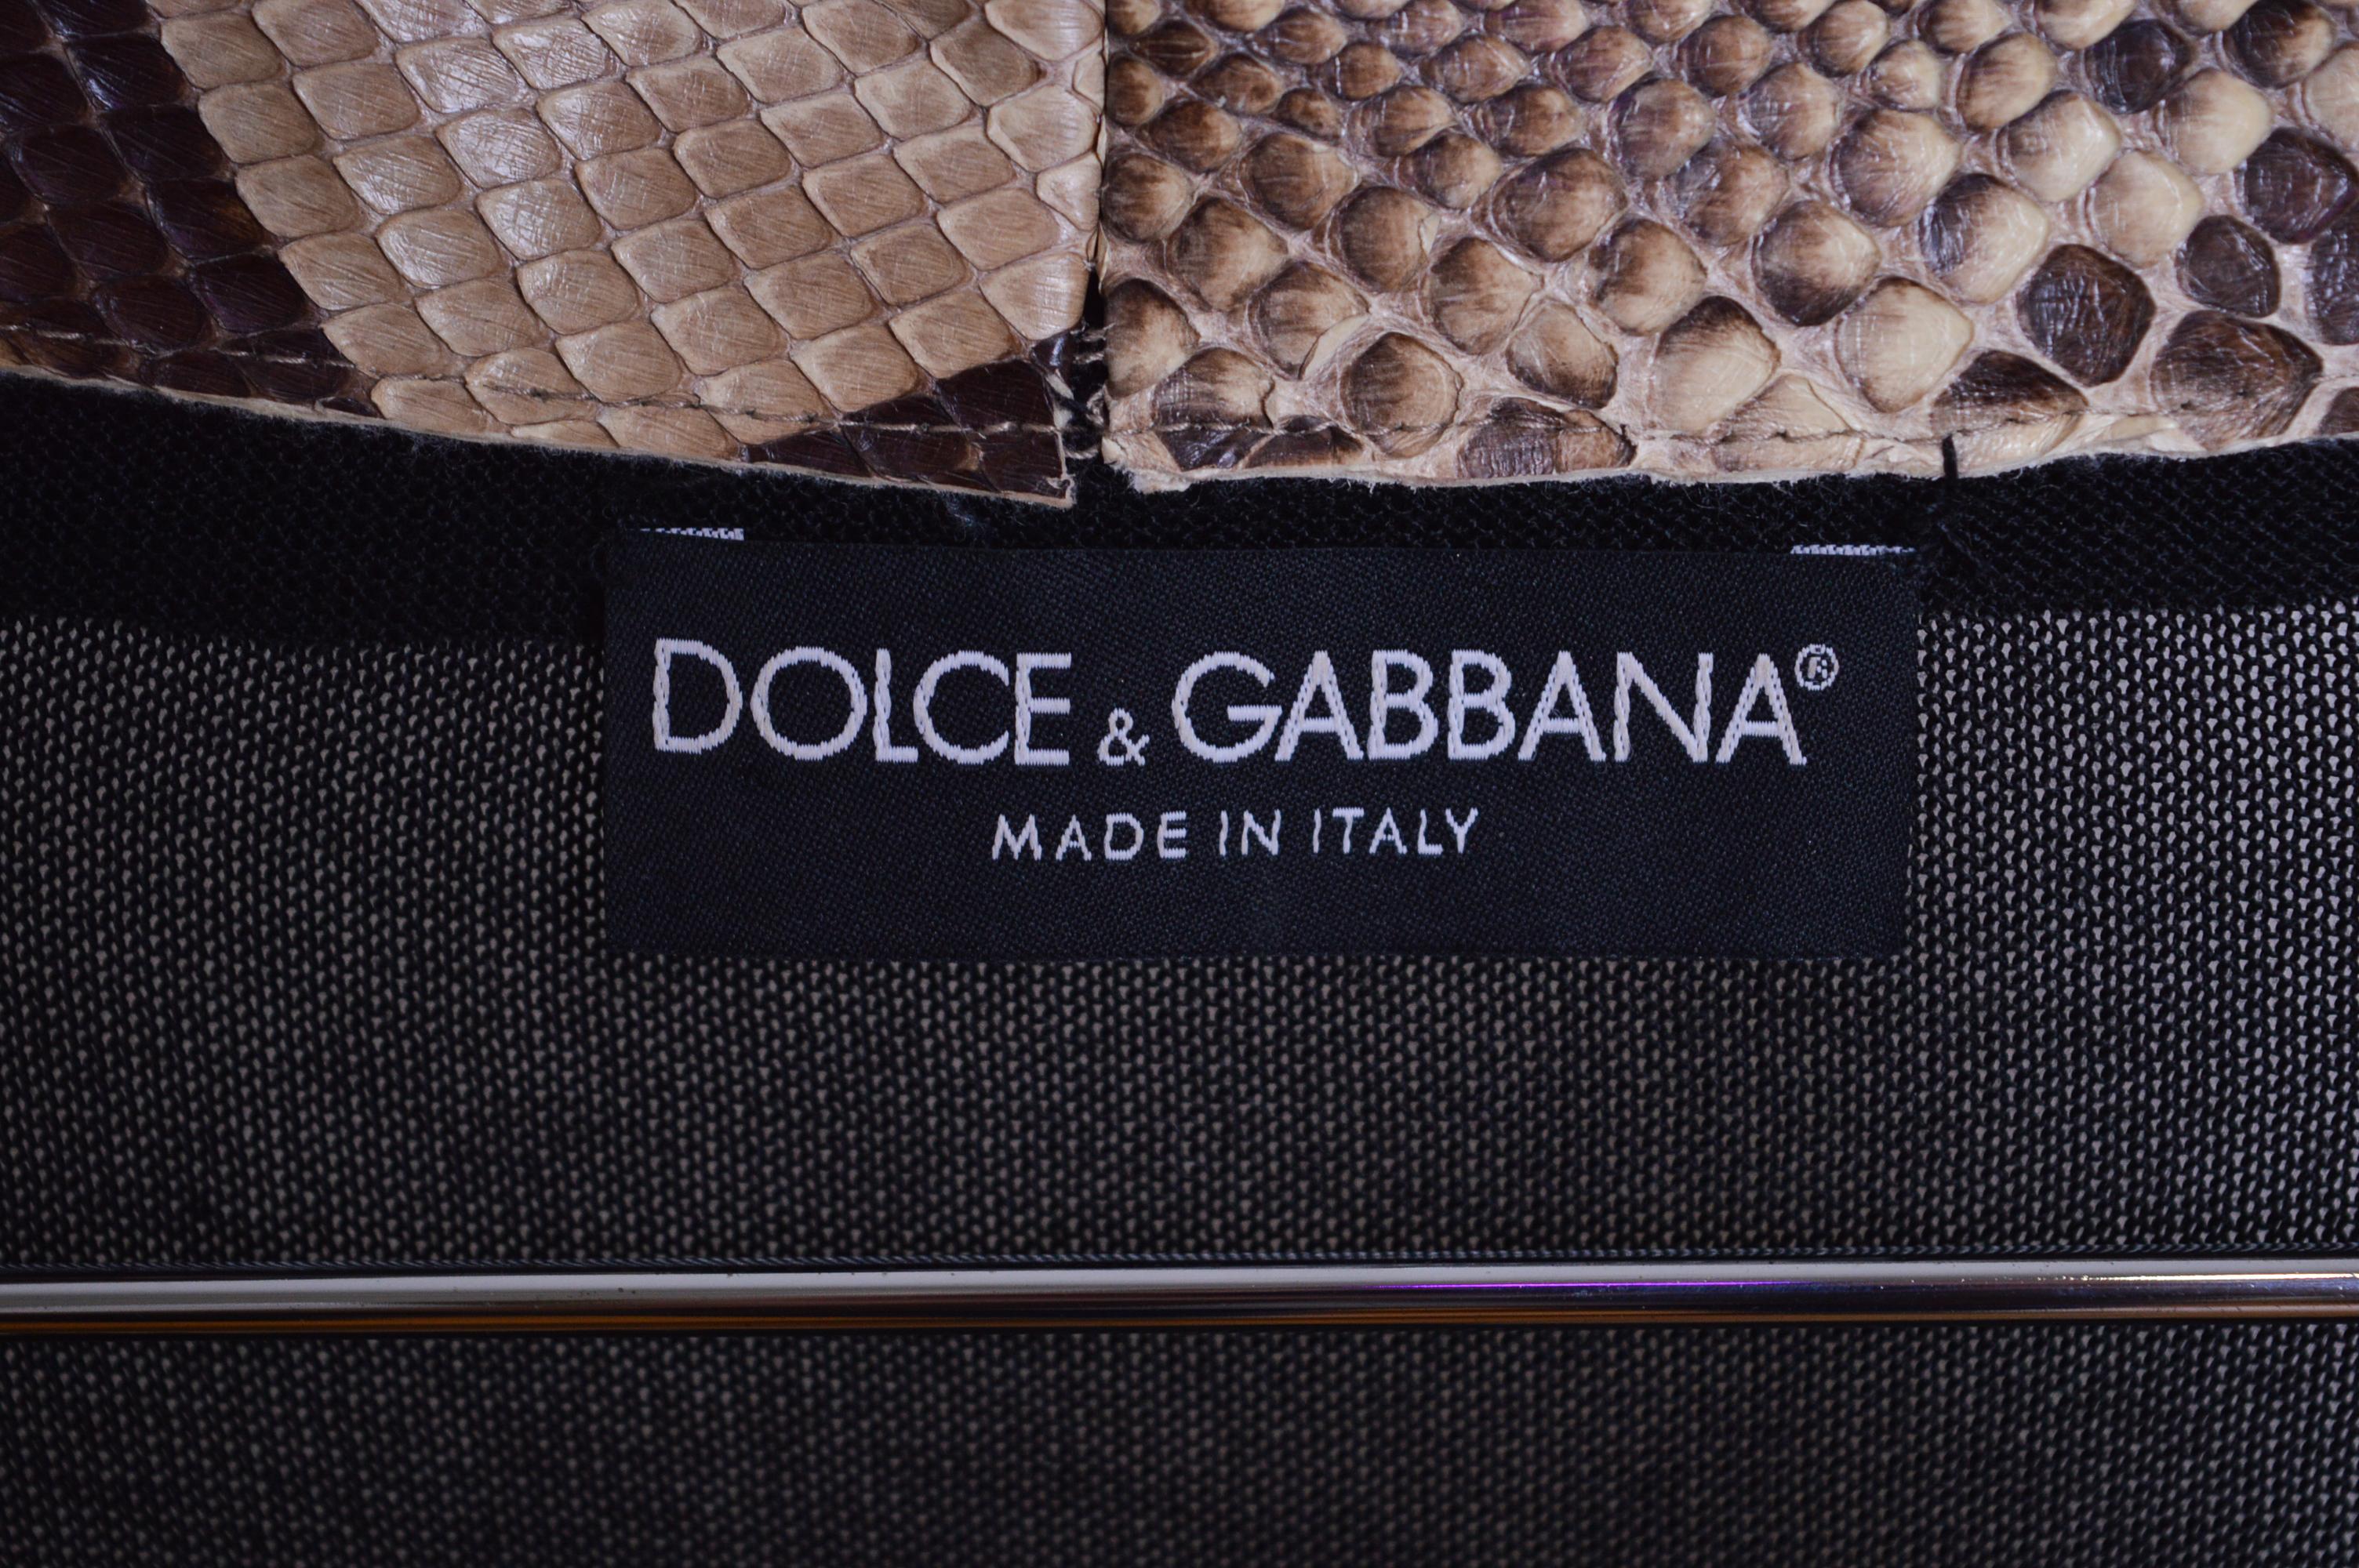 Chic Black Python Dolce & Gabbana Wrap around Knit Cardigan Sweater In Good Condition For Sale In Sheffield, GB